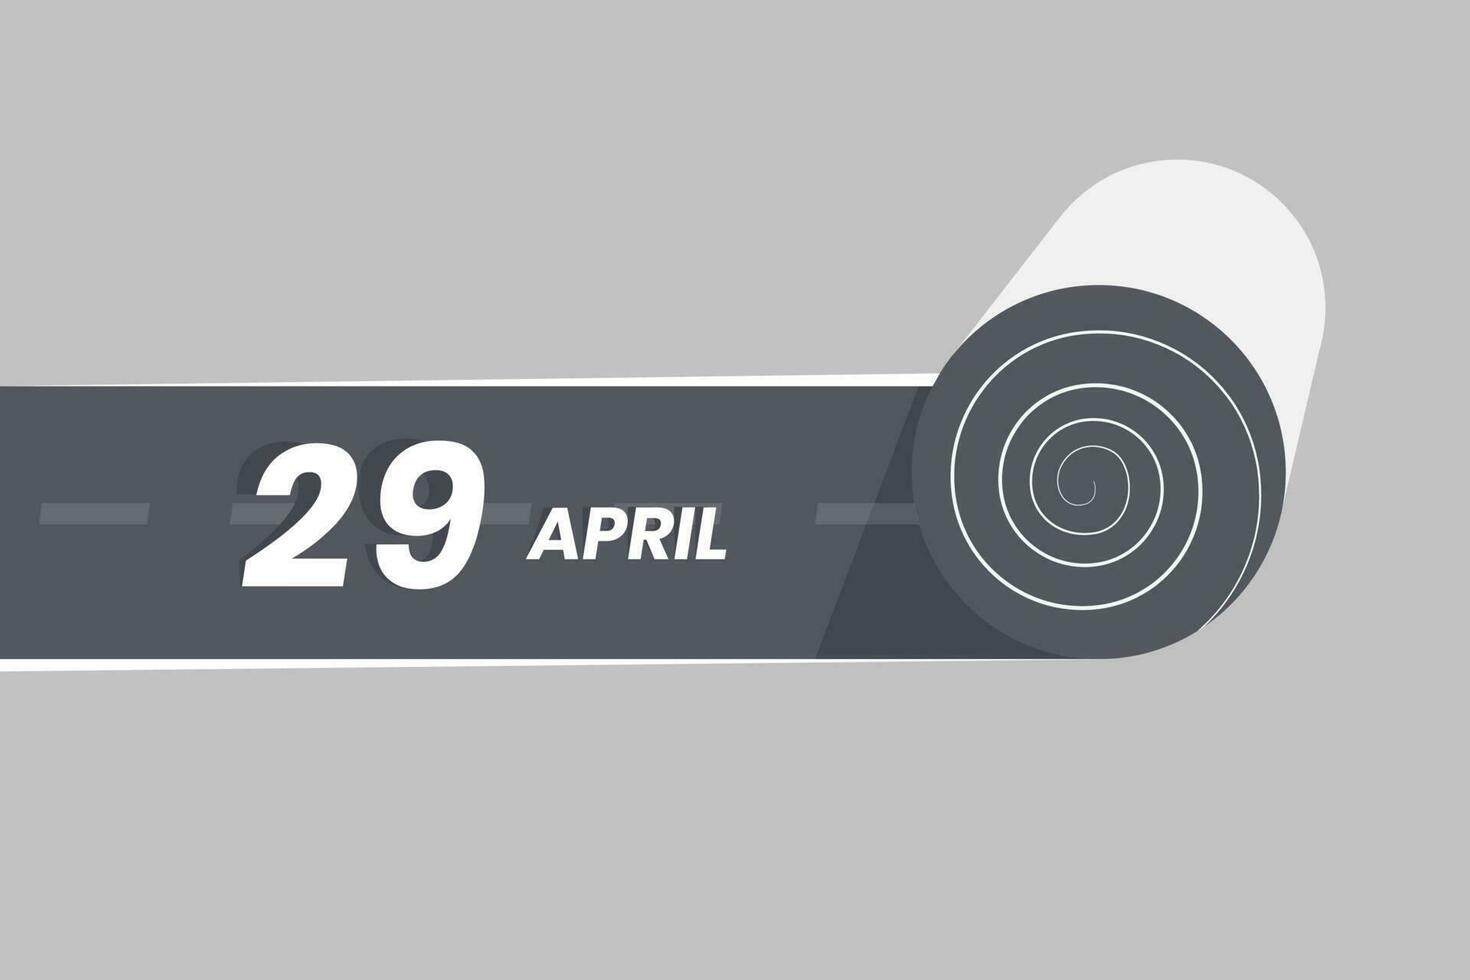 April 29 calendar icon rolling inside the road. 29 April Date Month icon vector illustrator.